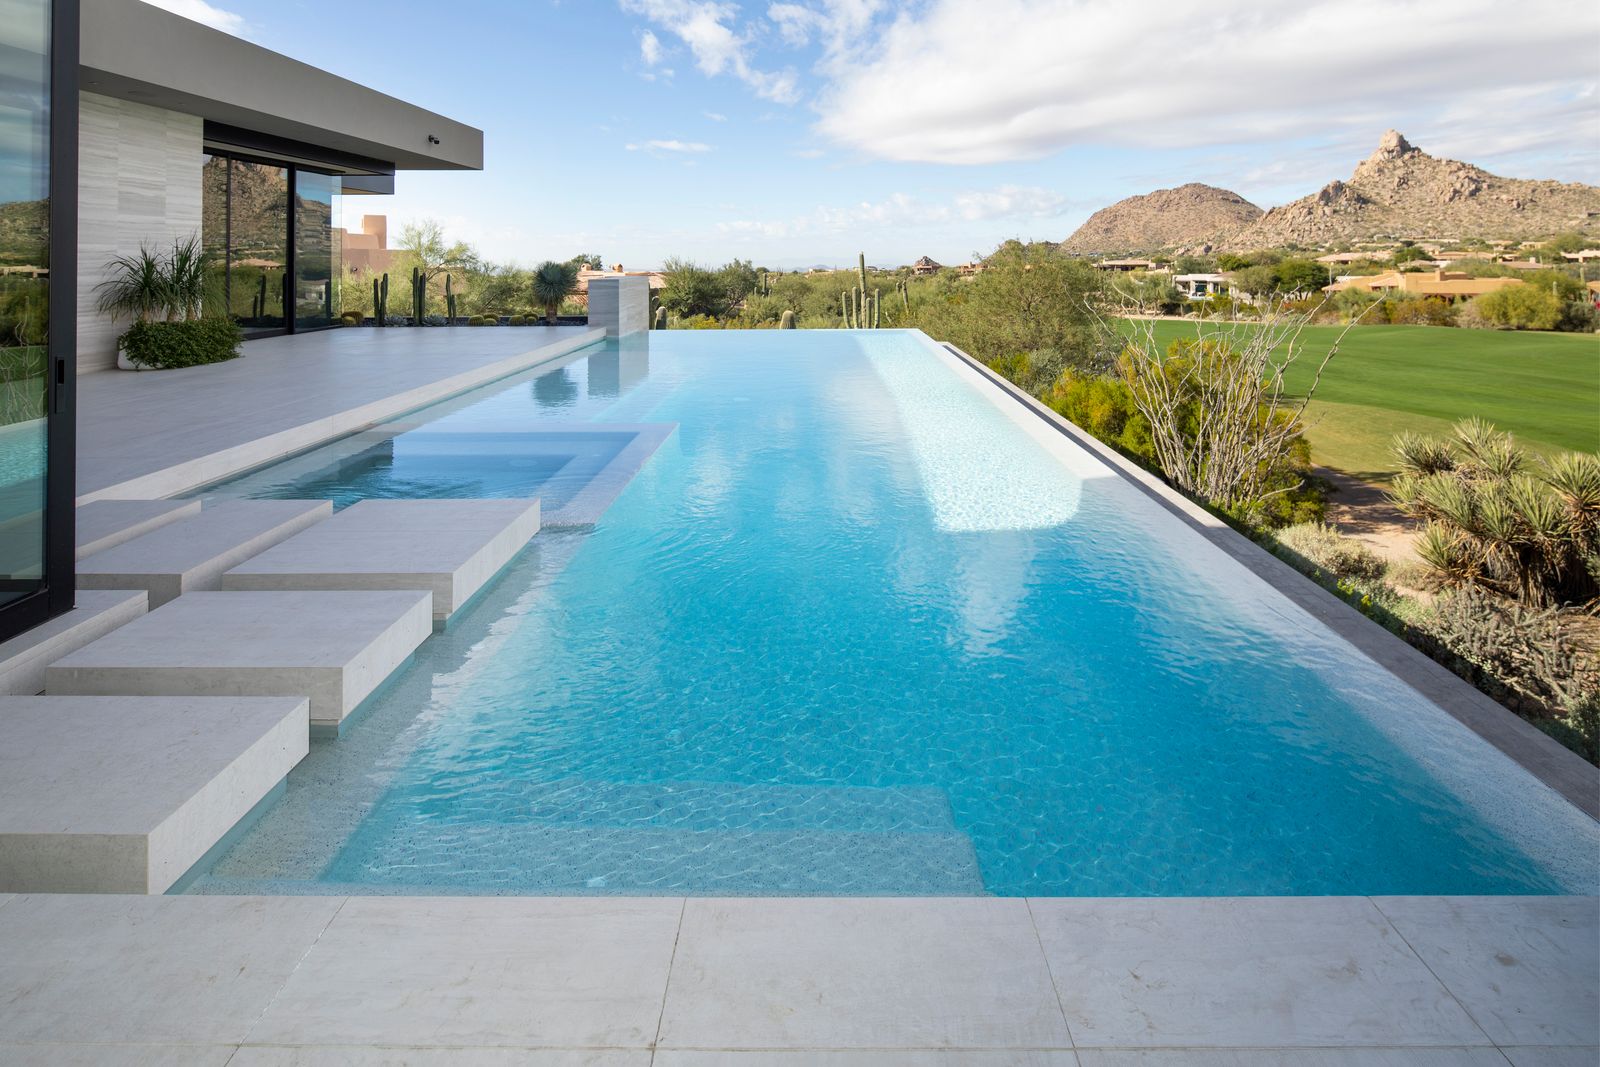 Mistakes to Avoid When Planning a Pool